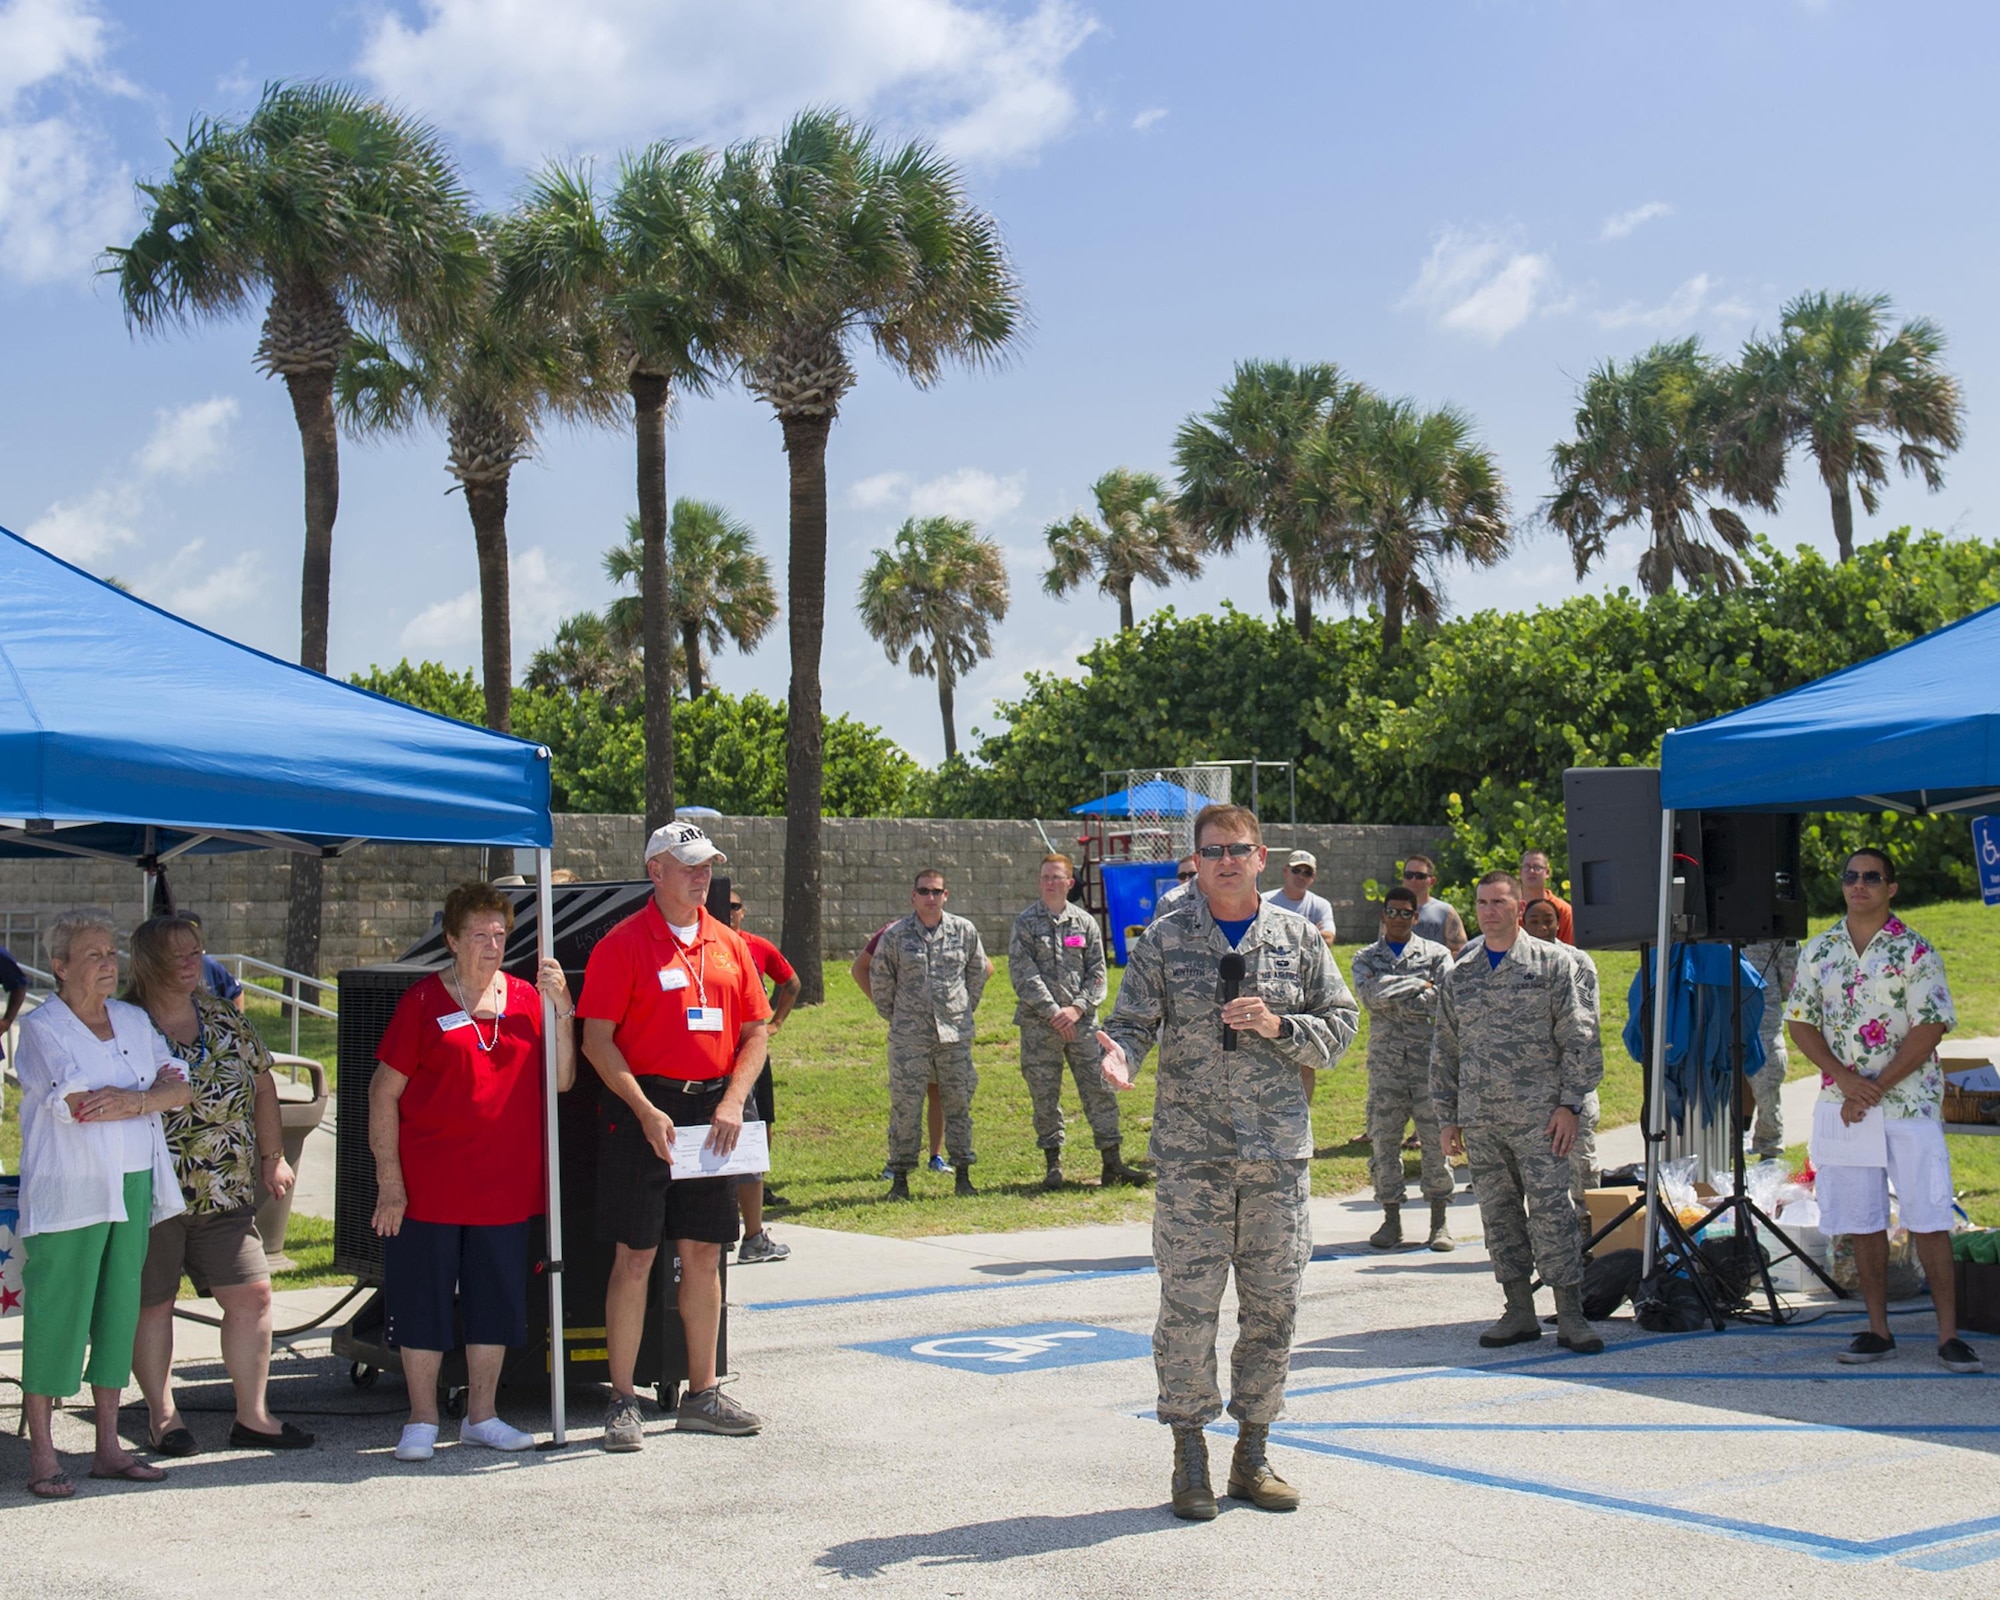 Brig. Gen. Wayne Monteith, 45th Space Wing commander, welcomes attendees to the 2016 Junior Enlisted Appreciation Picnic June 17, 2016, at Patrick Air Force Base, Fla. The commander thanked the council and the local community for their ongoing support to all service members and their families. (U.S. Air Force photo/Matthew S. Jurgens/Released)    